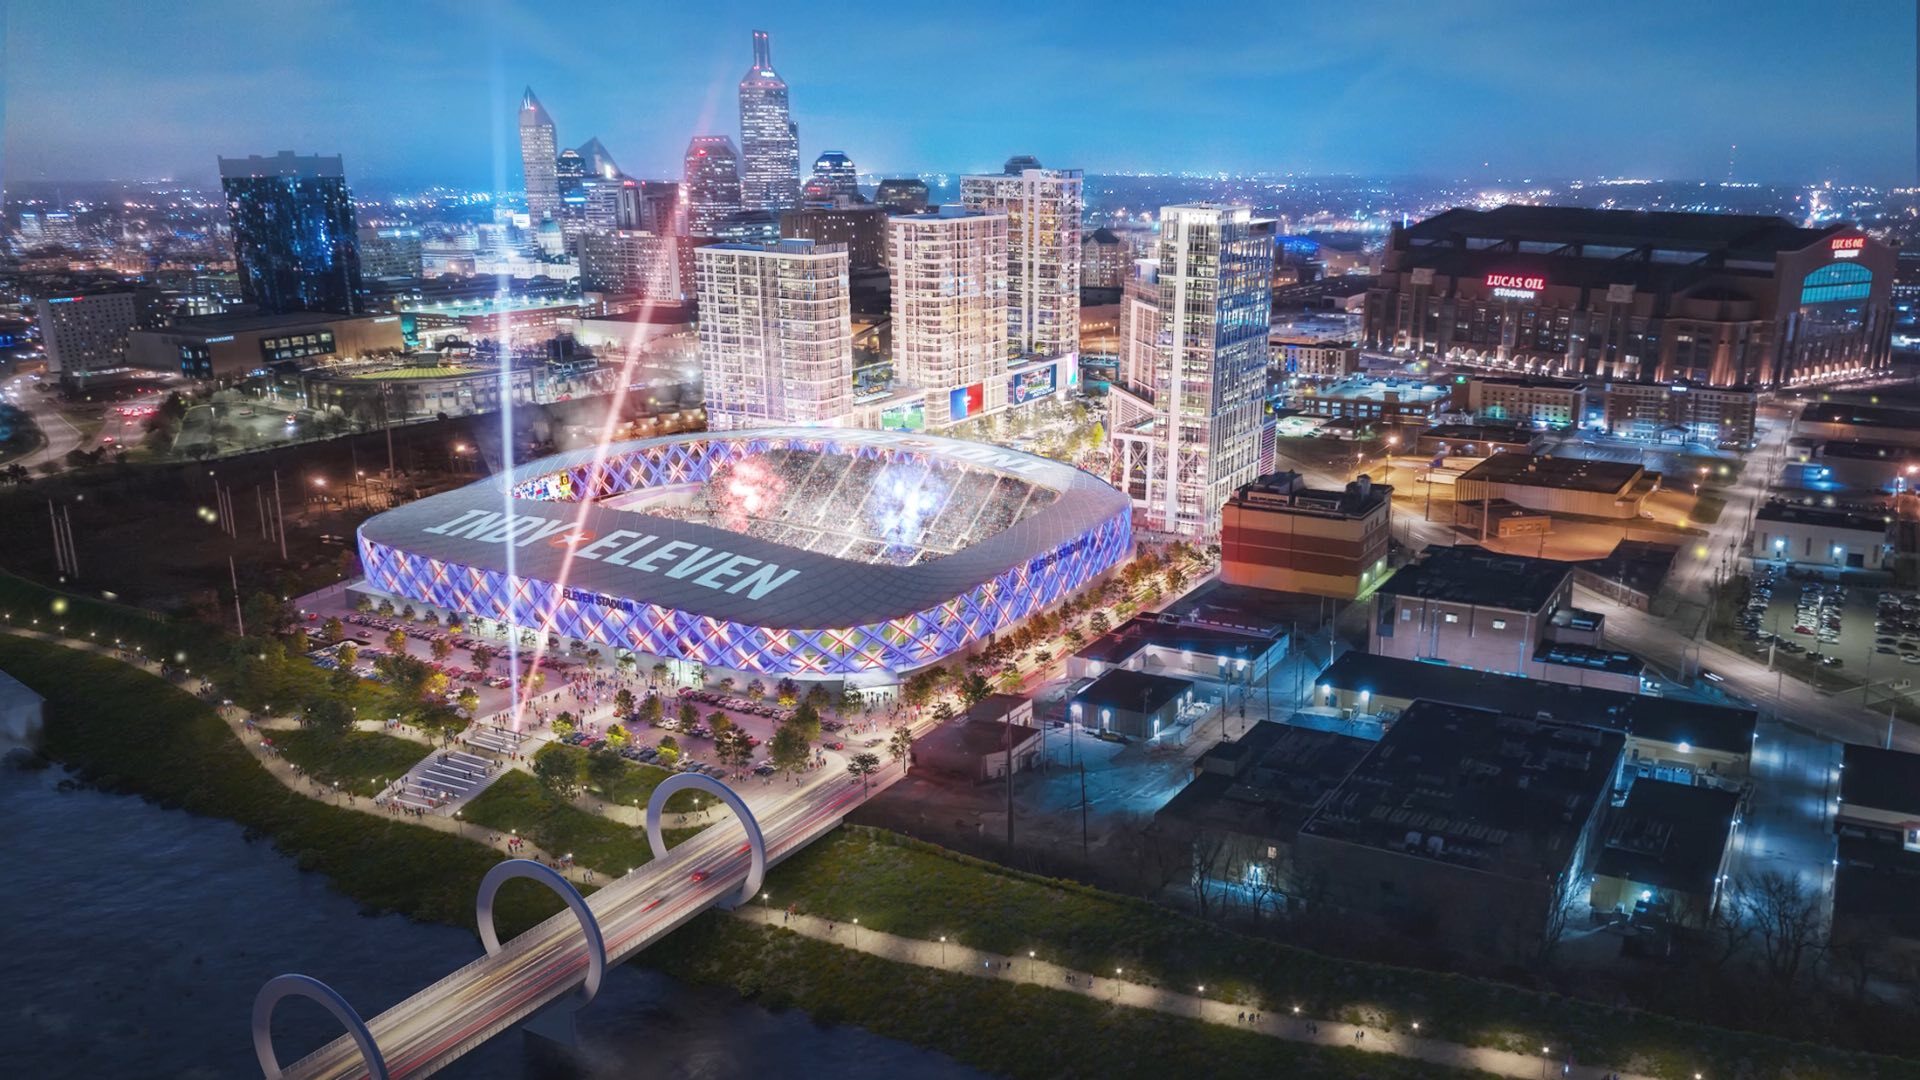 Indy Eleven and Keystone Group break ground on Eleven Park, a transformational riverfront development anchored by multi-purpose soccer stadium